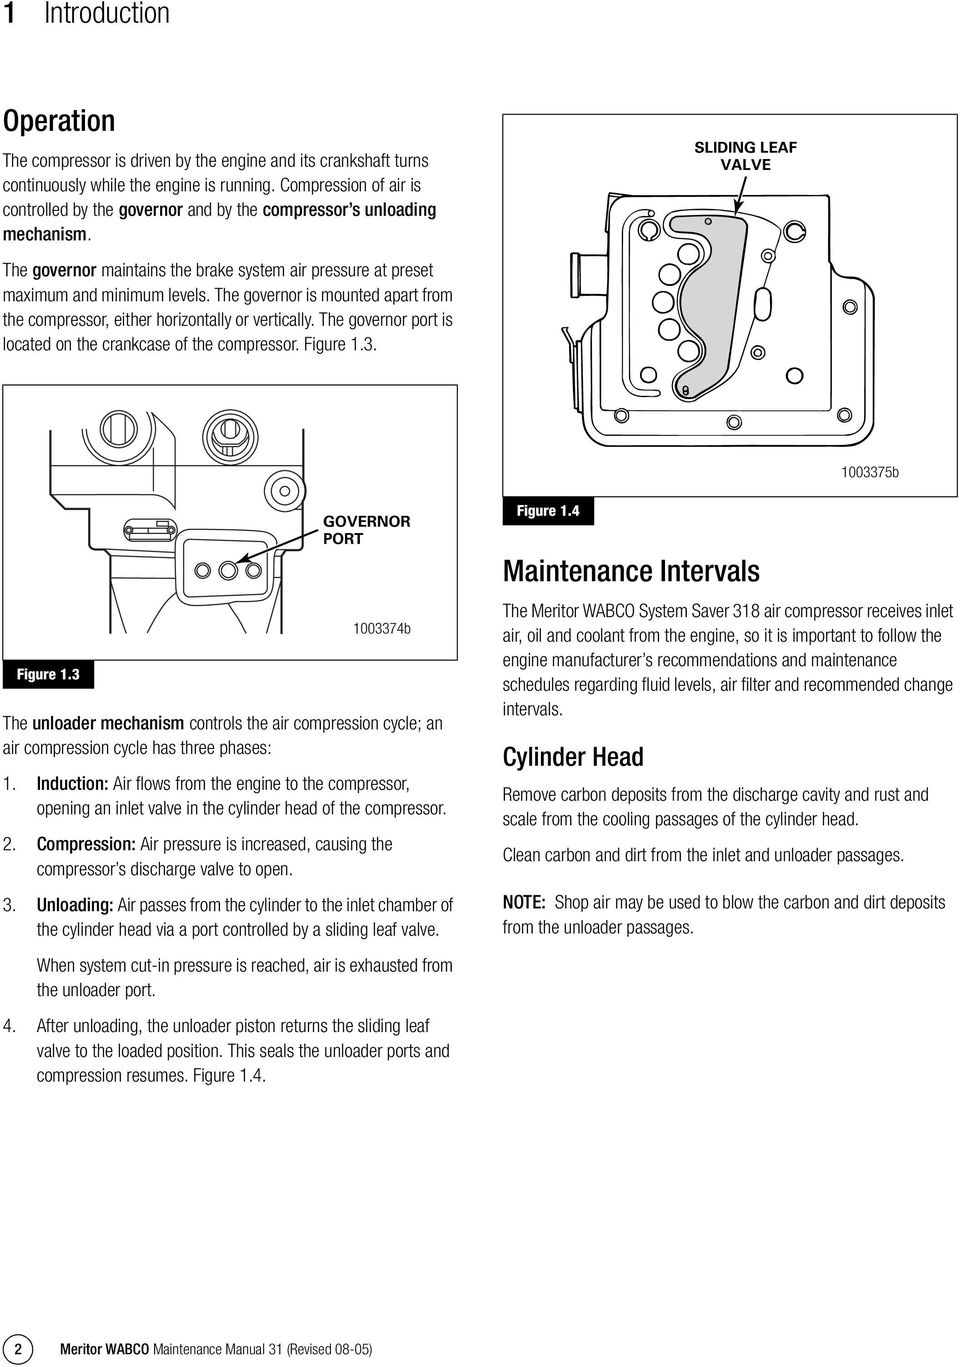 The governor is mounted apart from the compressor, either horizontally or vertically. The governor port is located on the crankcase of the compressor. Figure 1.3. Figure 1.4 SLIDING LEAF VALVE Figure 1.